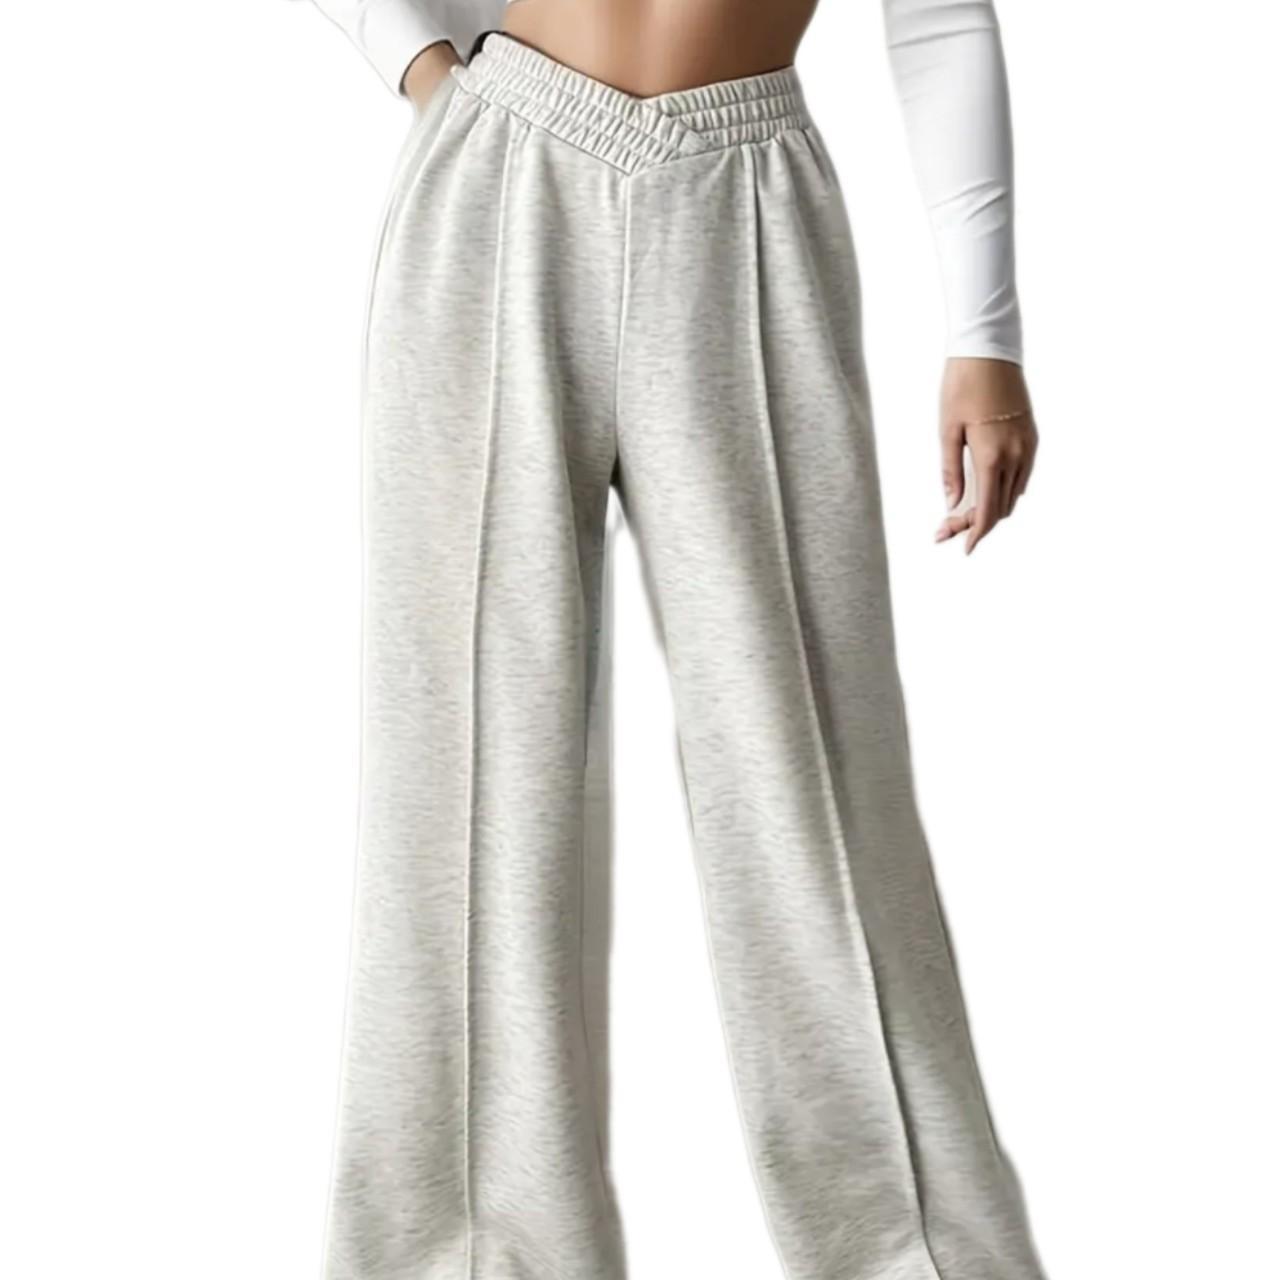 Anna Lou of London Women's Joggers-tracksuits